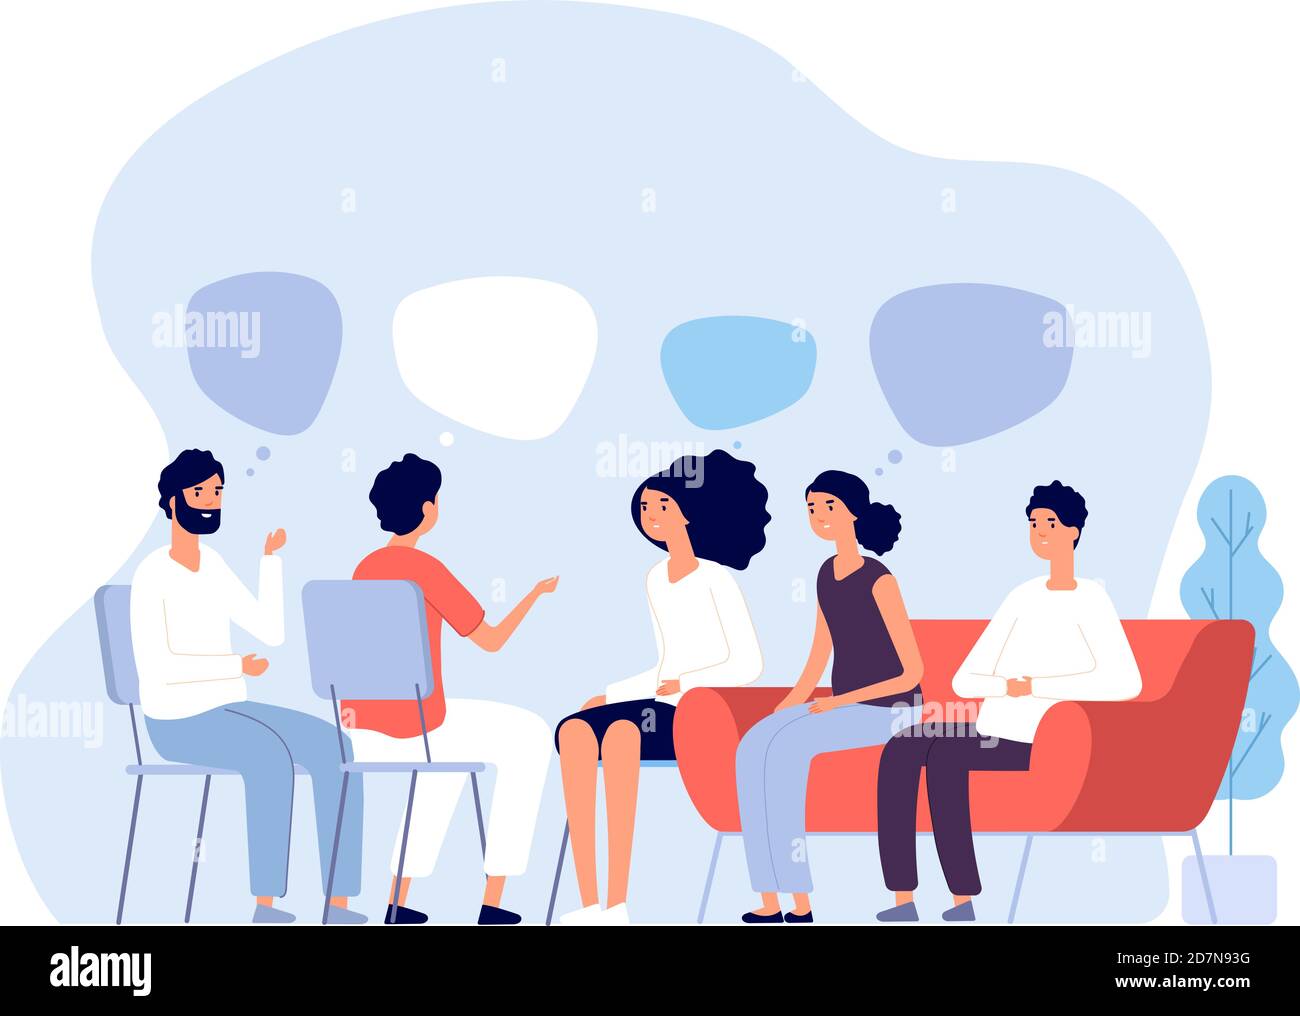 Addiction treatment concept. Group therapy, people counseling with psychologist, persons in psychotherapist sessions. Vector image. Illustration psychologist counseling group patient Stock Vector